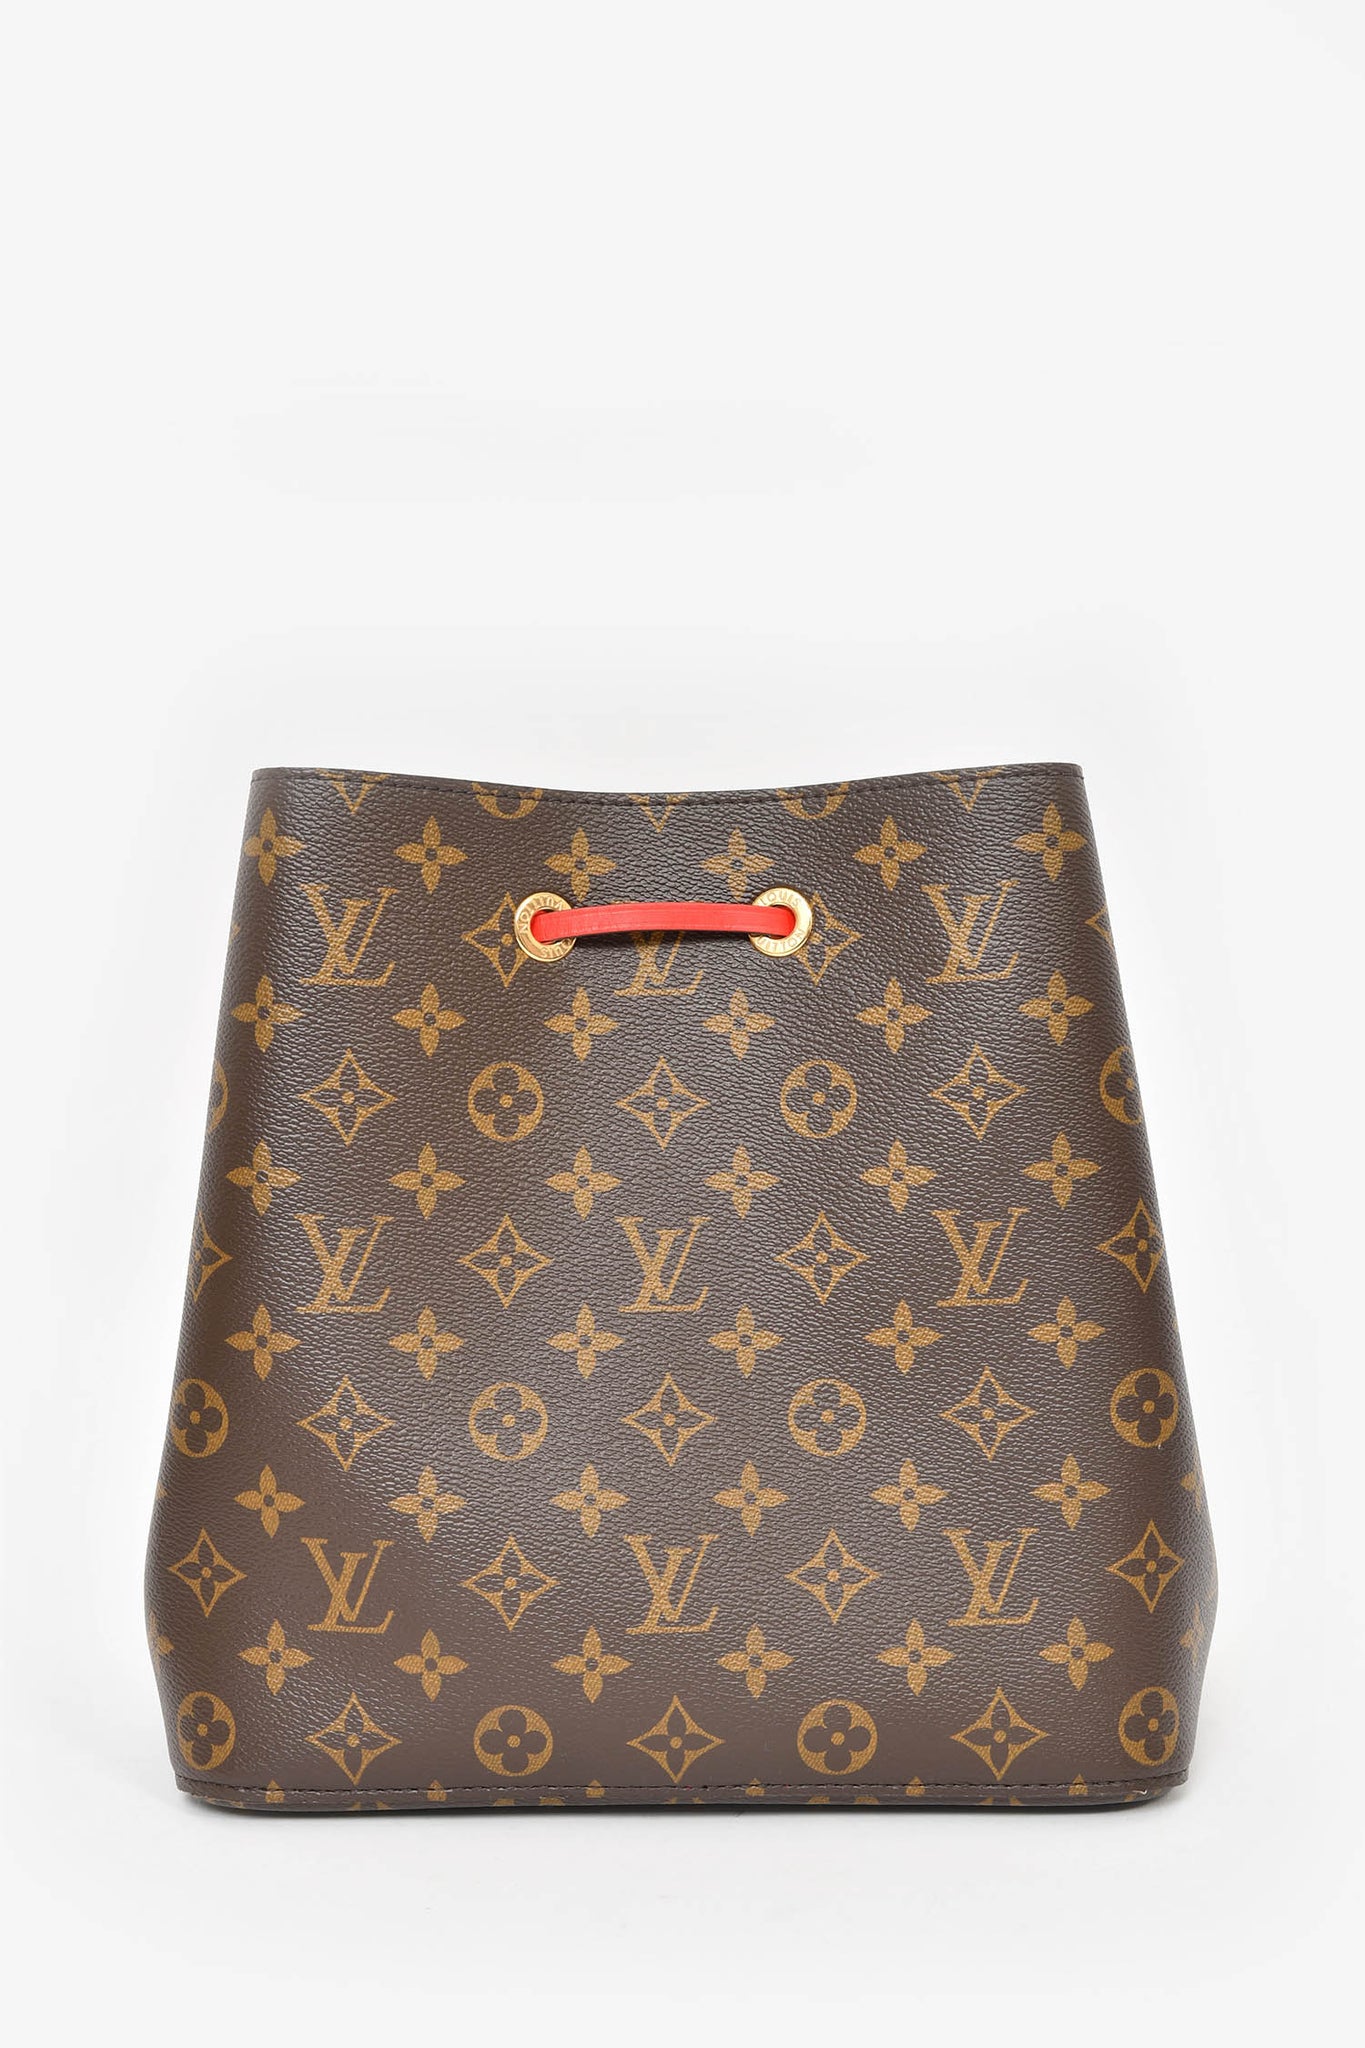 Louis Vuitton 2005 Rare Limited Edition Cherry Tote · INTO